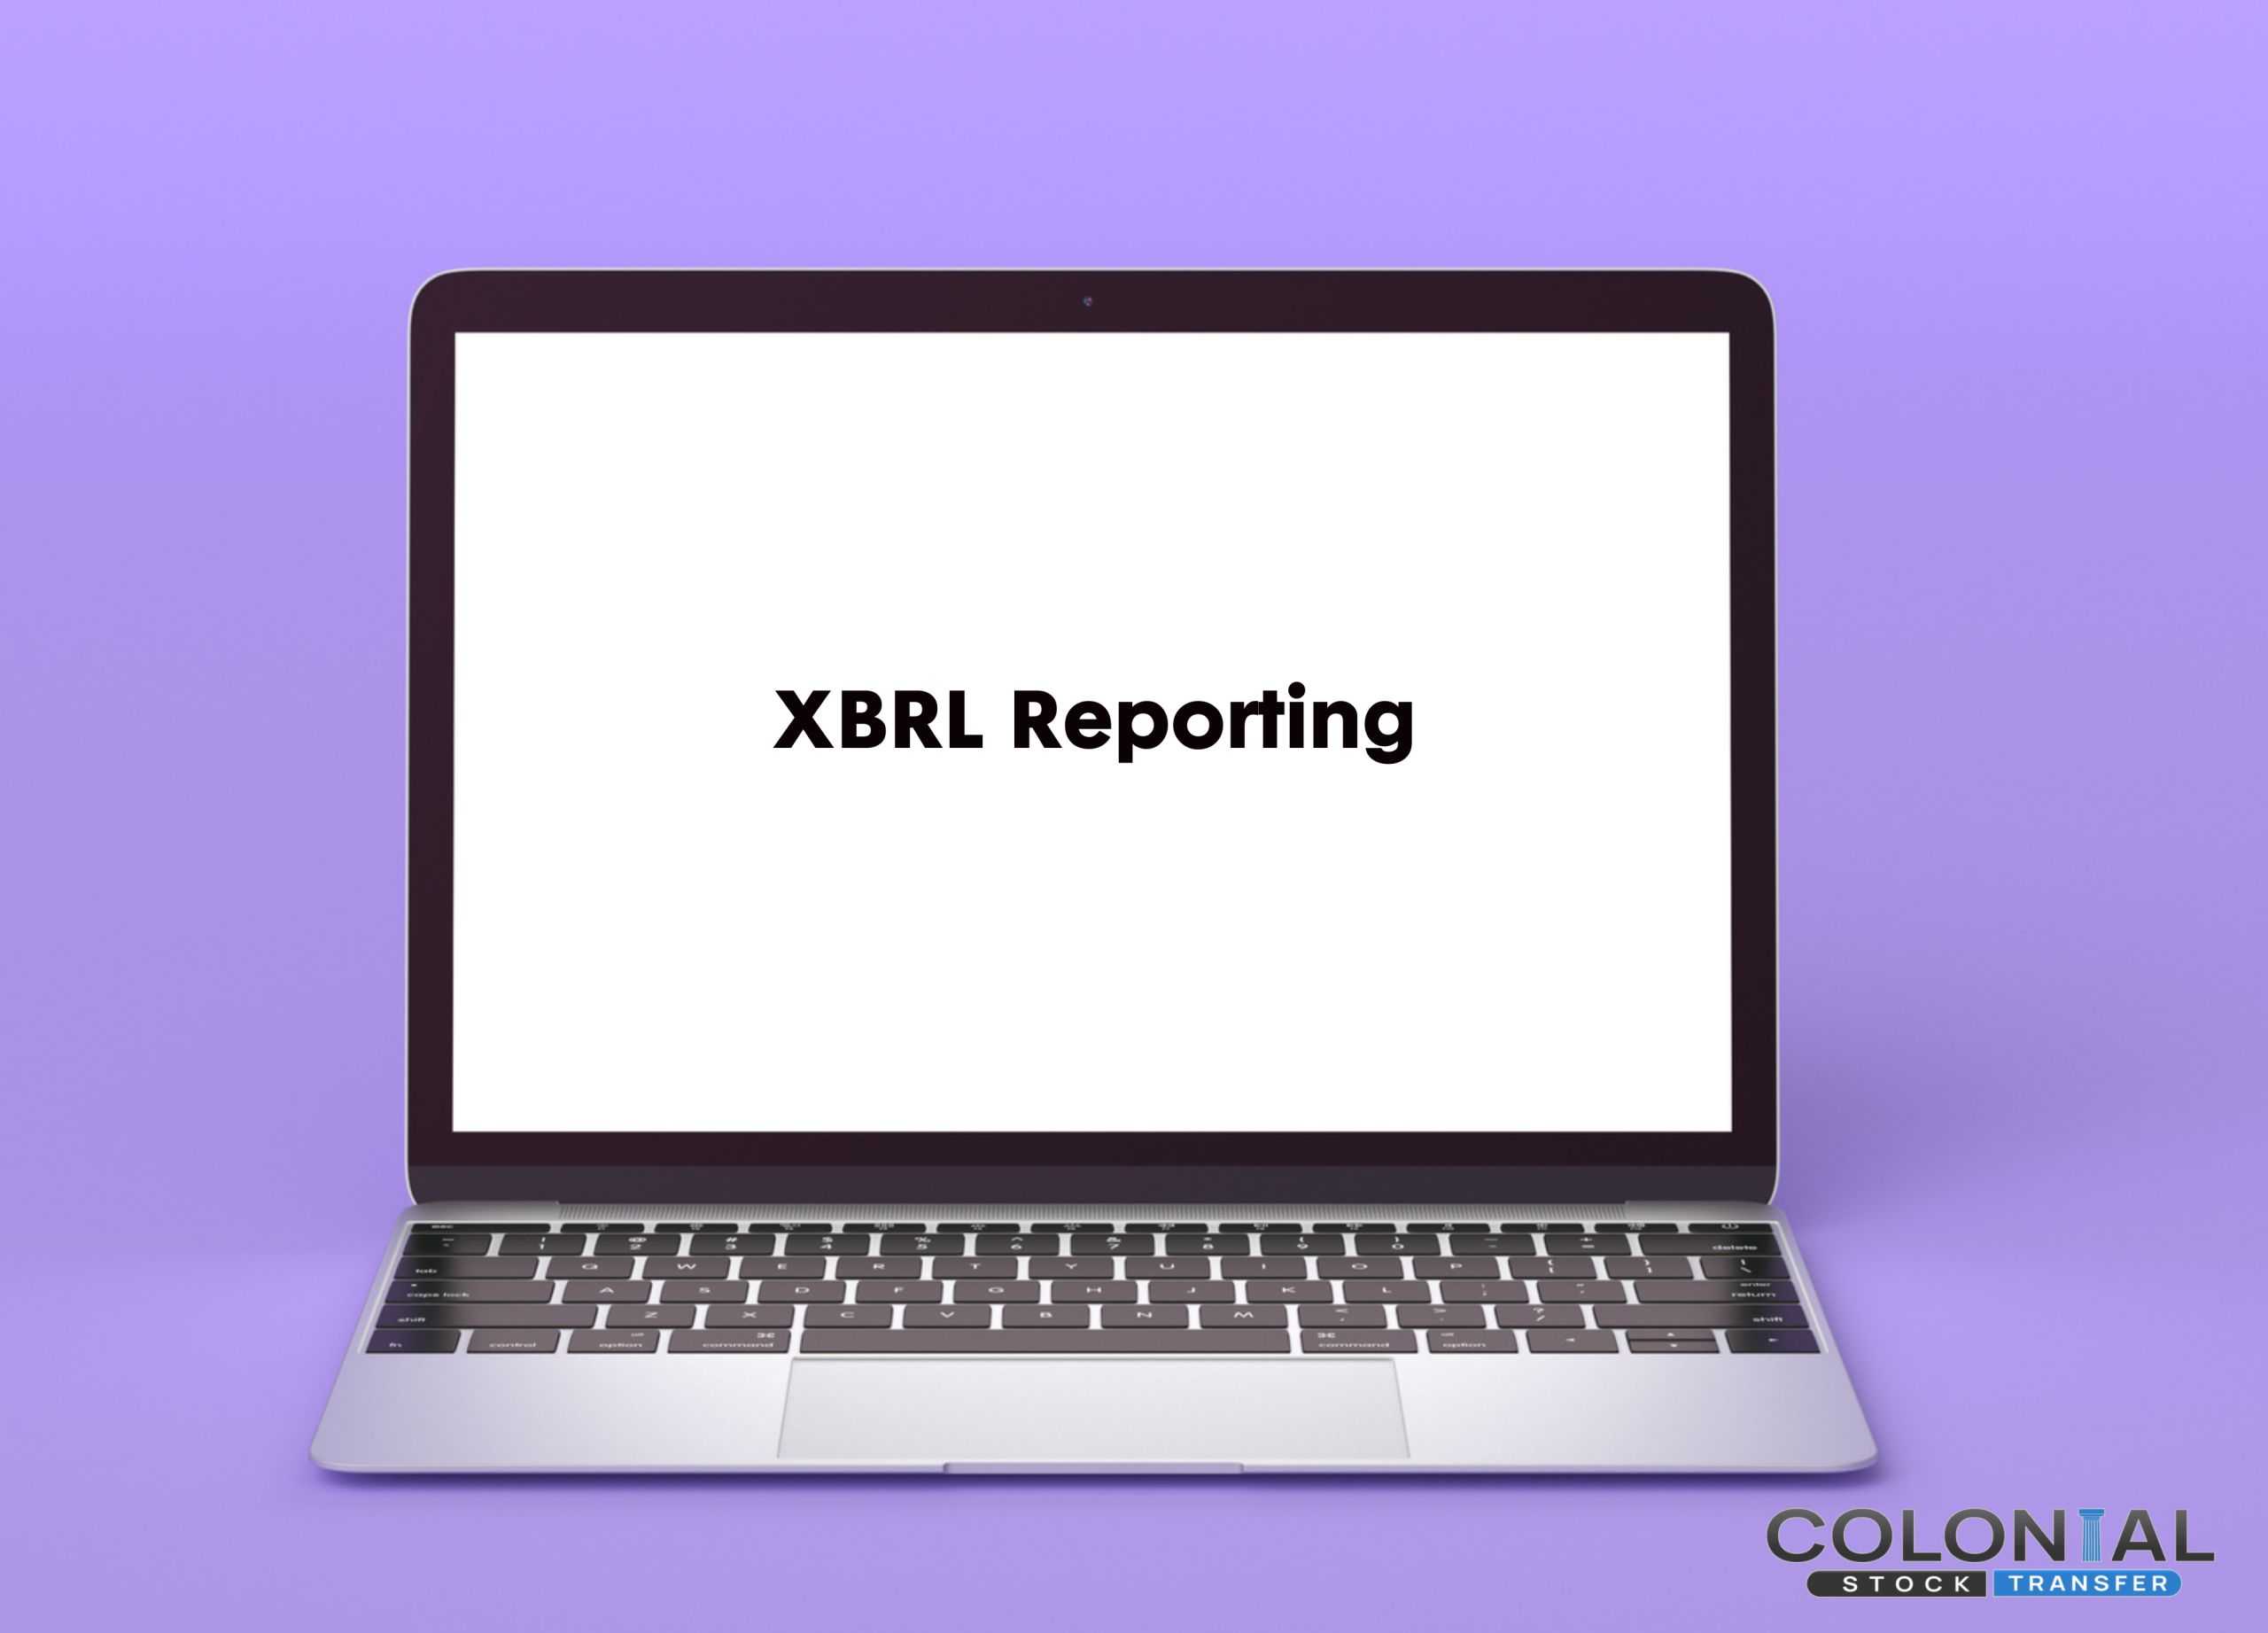 How to Remain Compliant with XBRL Financial Reporting